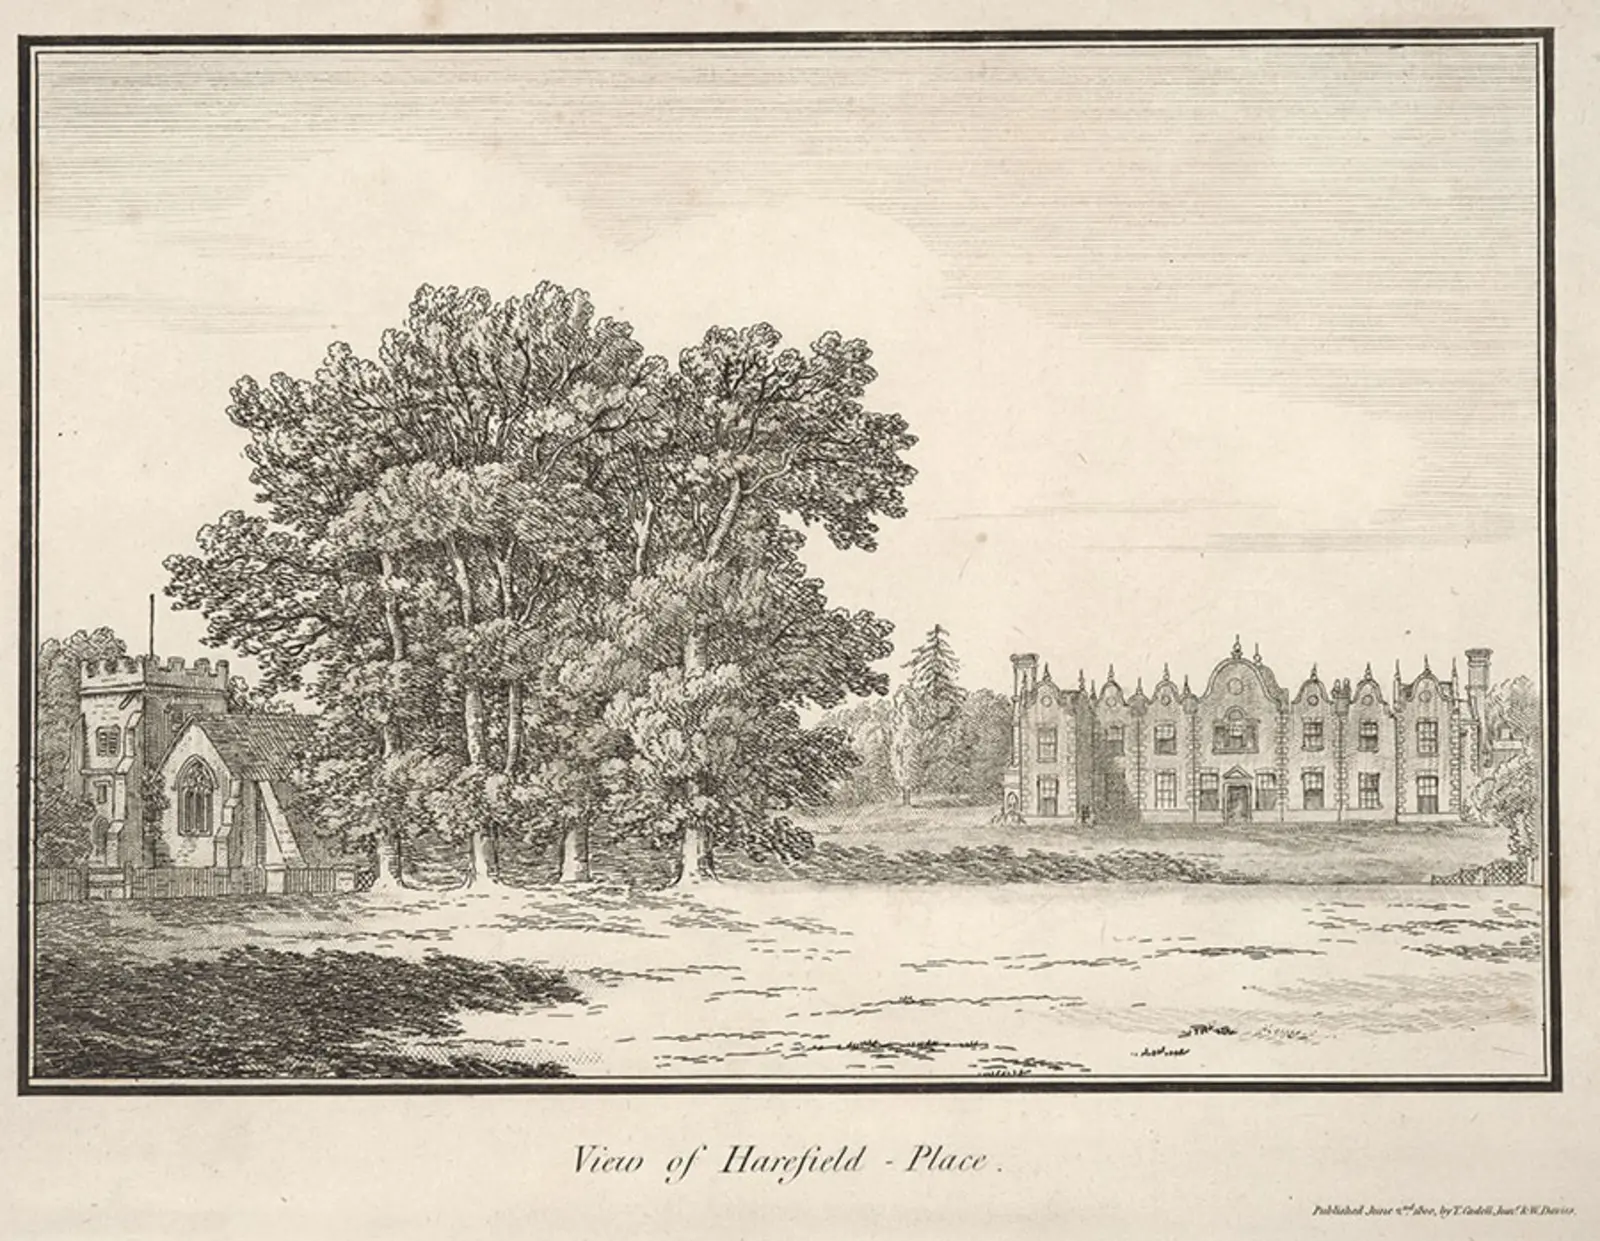 Engraving of Harefield Place with trees and an open field